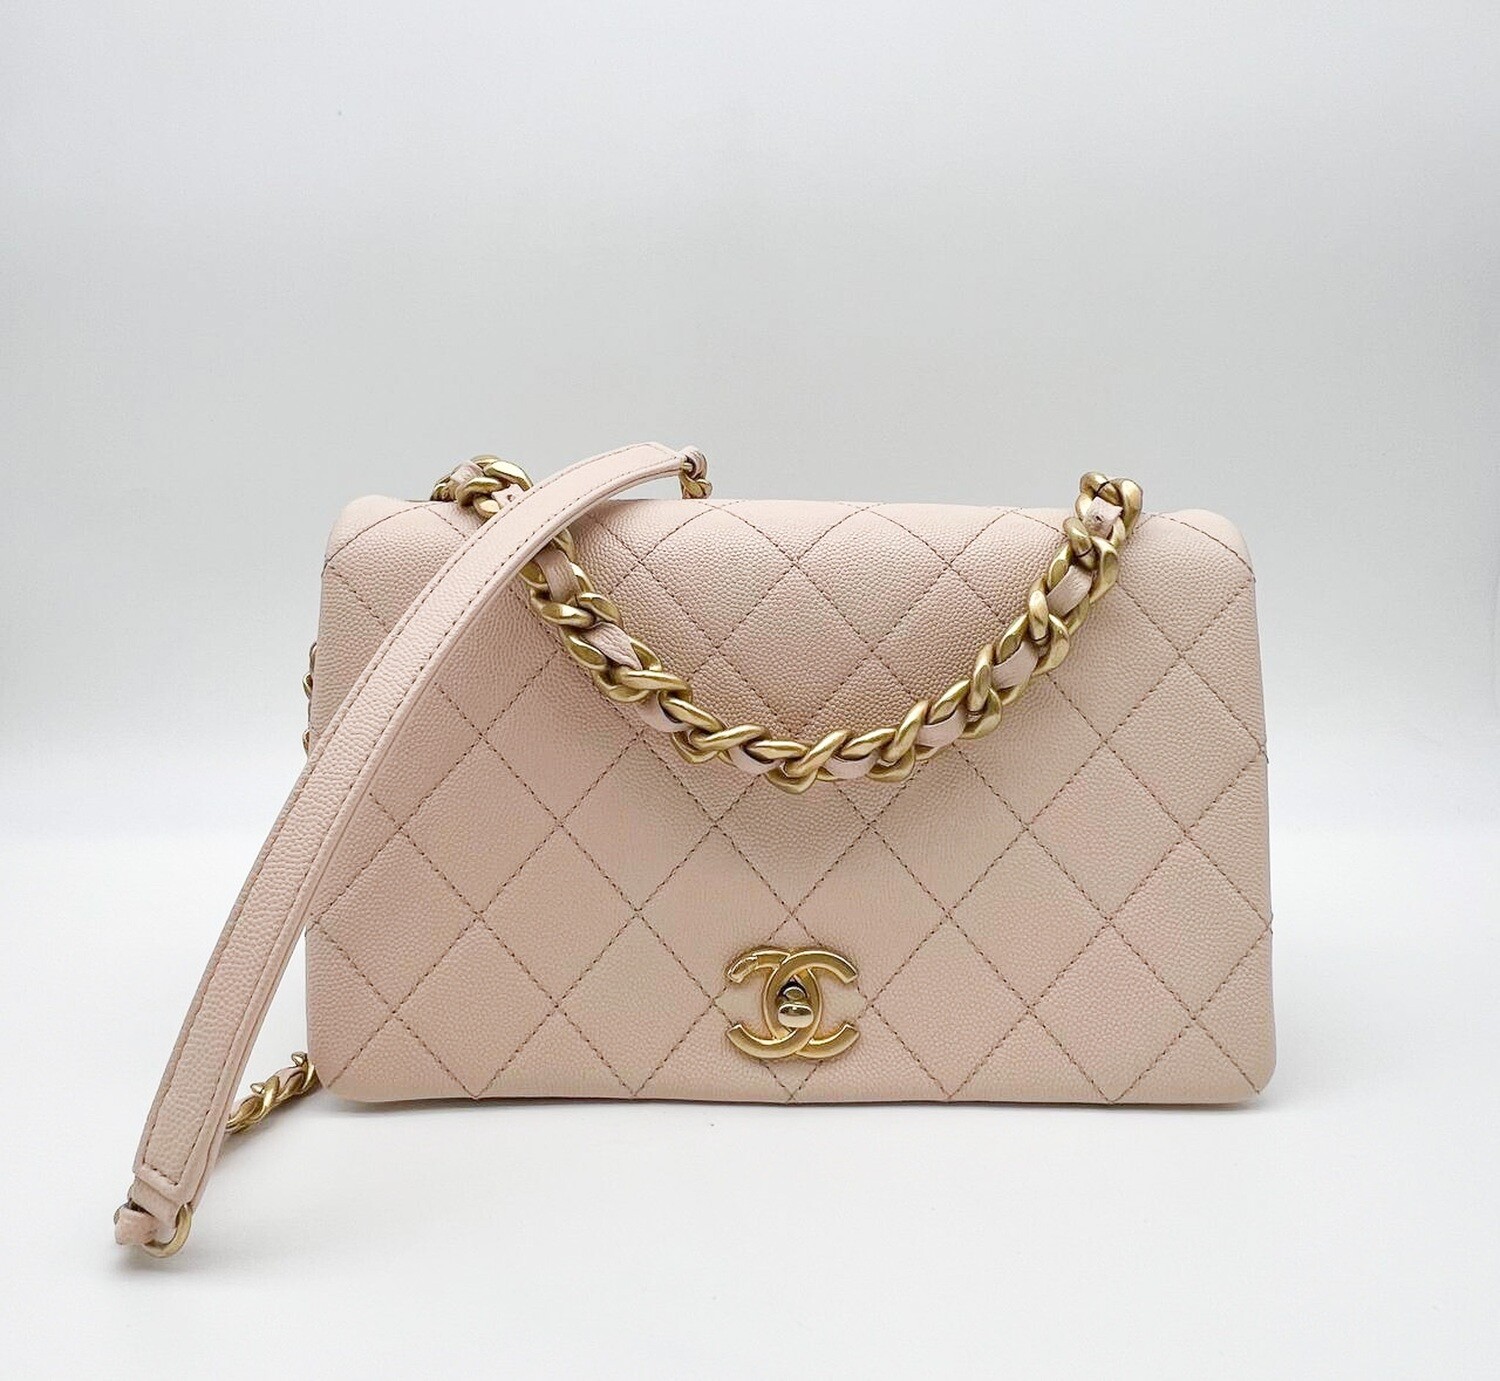 Chanel Fashion Therapy Flap, Medium, Beige Caviar Leather, Brushed Gold  Hardware, Preowned in Dustbag MA001